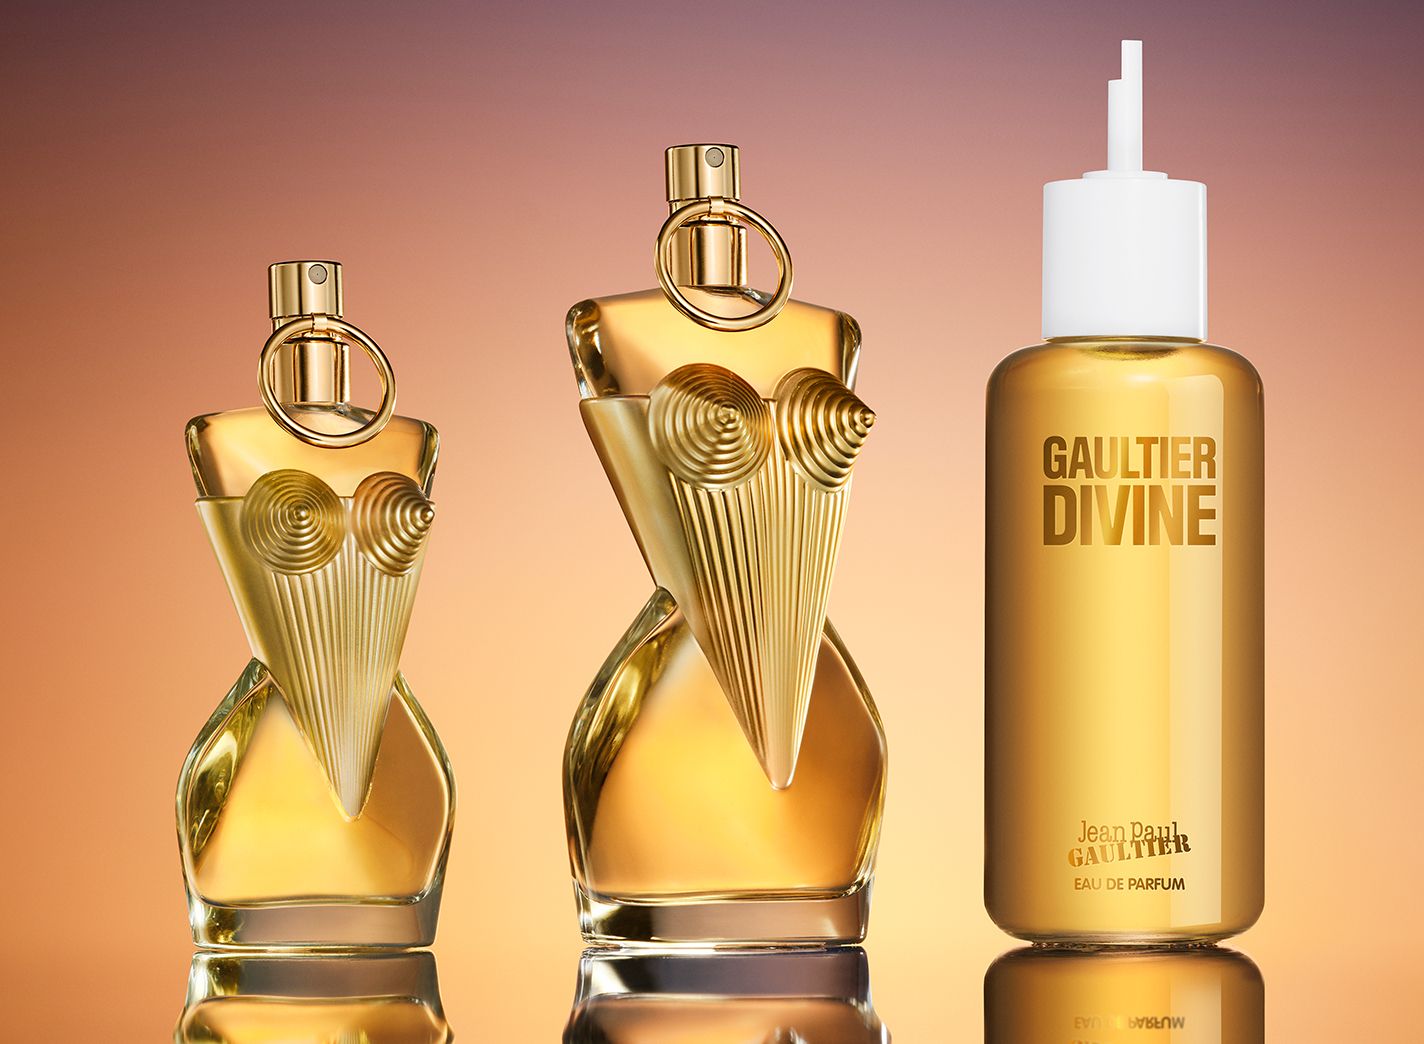 Gaultier Divine - the muses